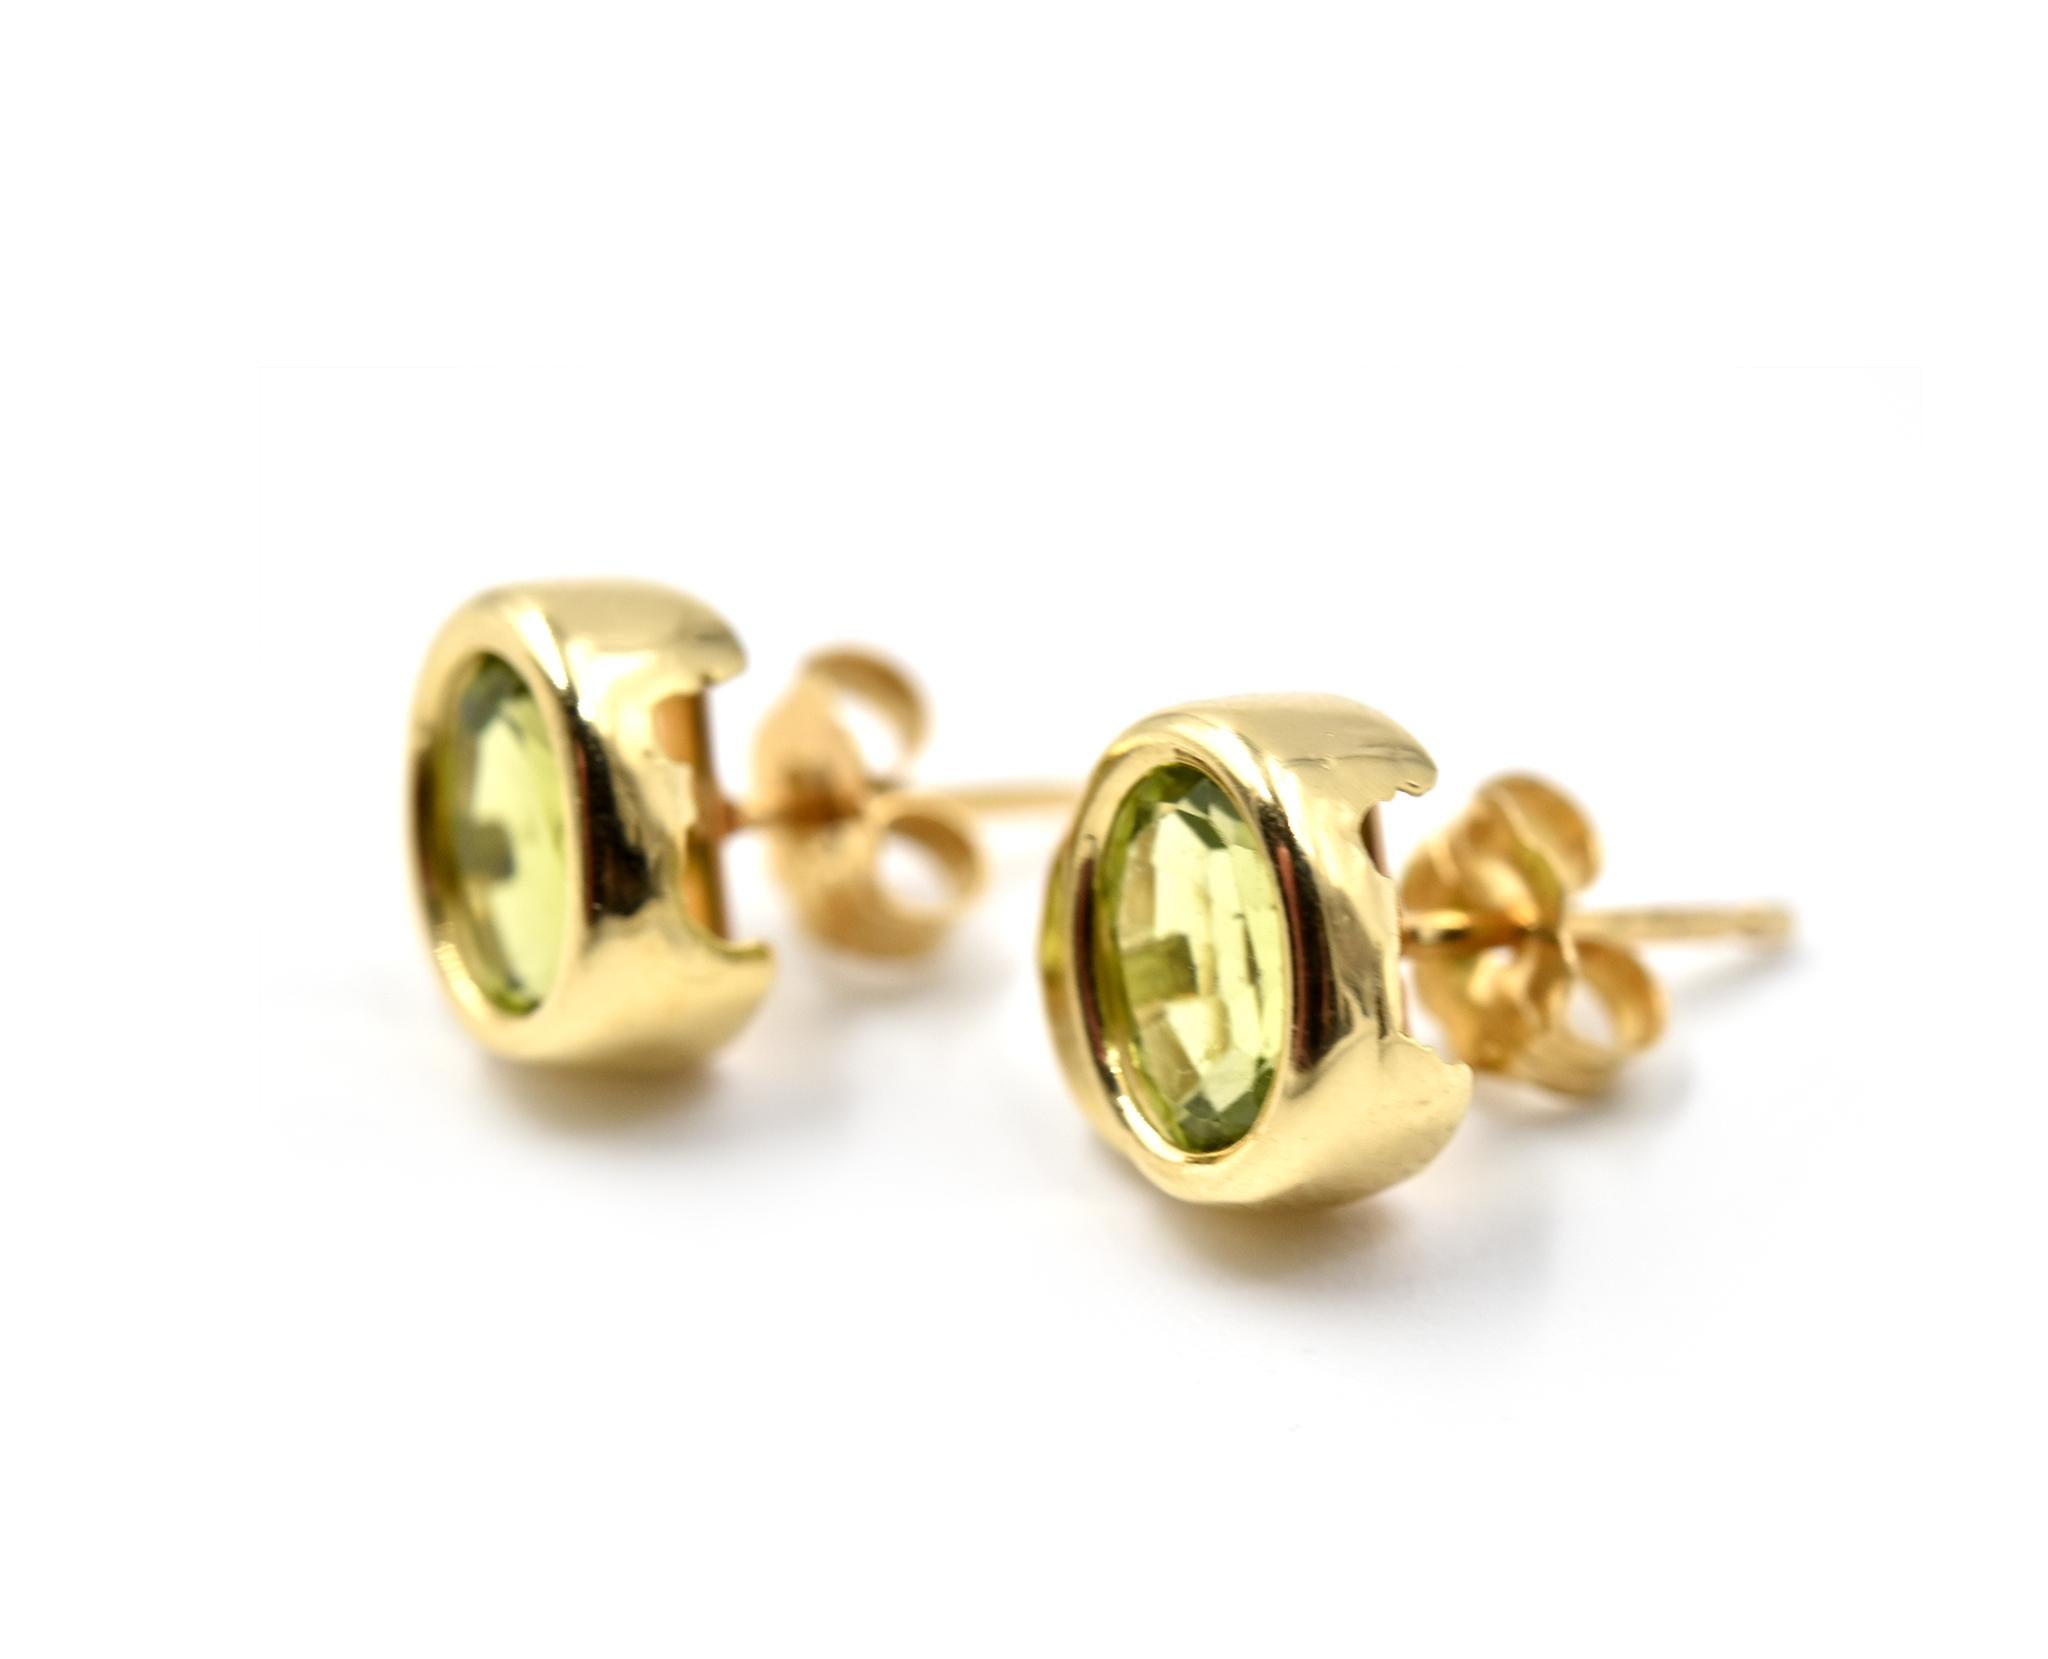 Designer: custom design
Material: 14k yellow gold
Gemstones: 2 oval peridots’
Dimensions: earrings measure approximately 8.45mm by 8.03mm
Fastenings: post with friction backs
Weight: 2.03 grams
